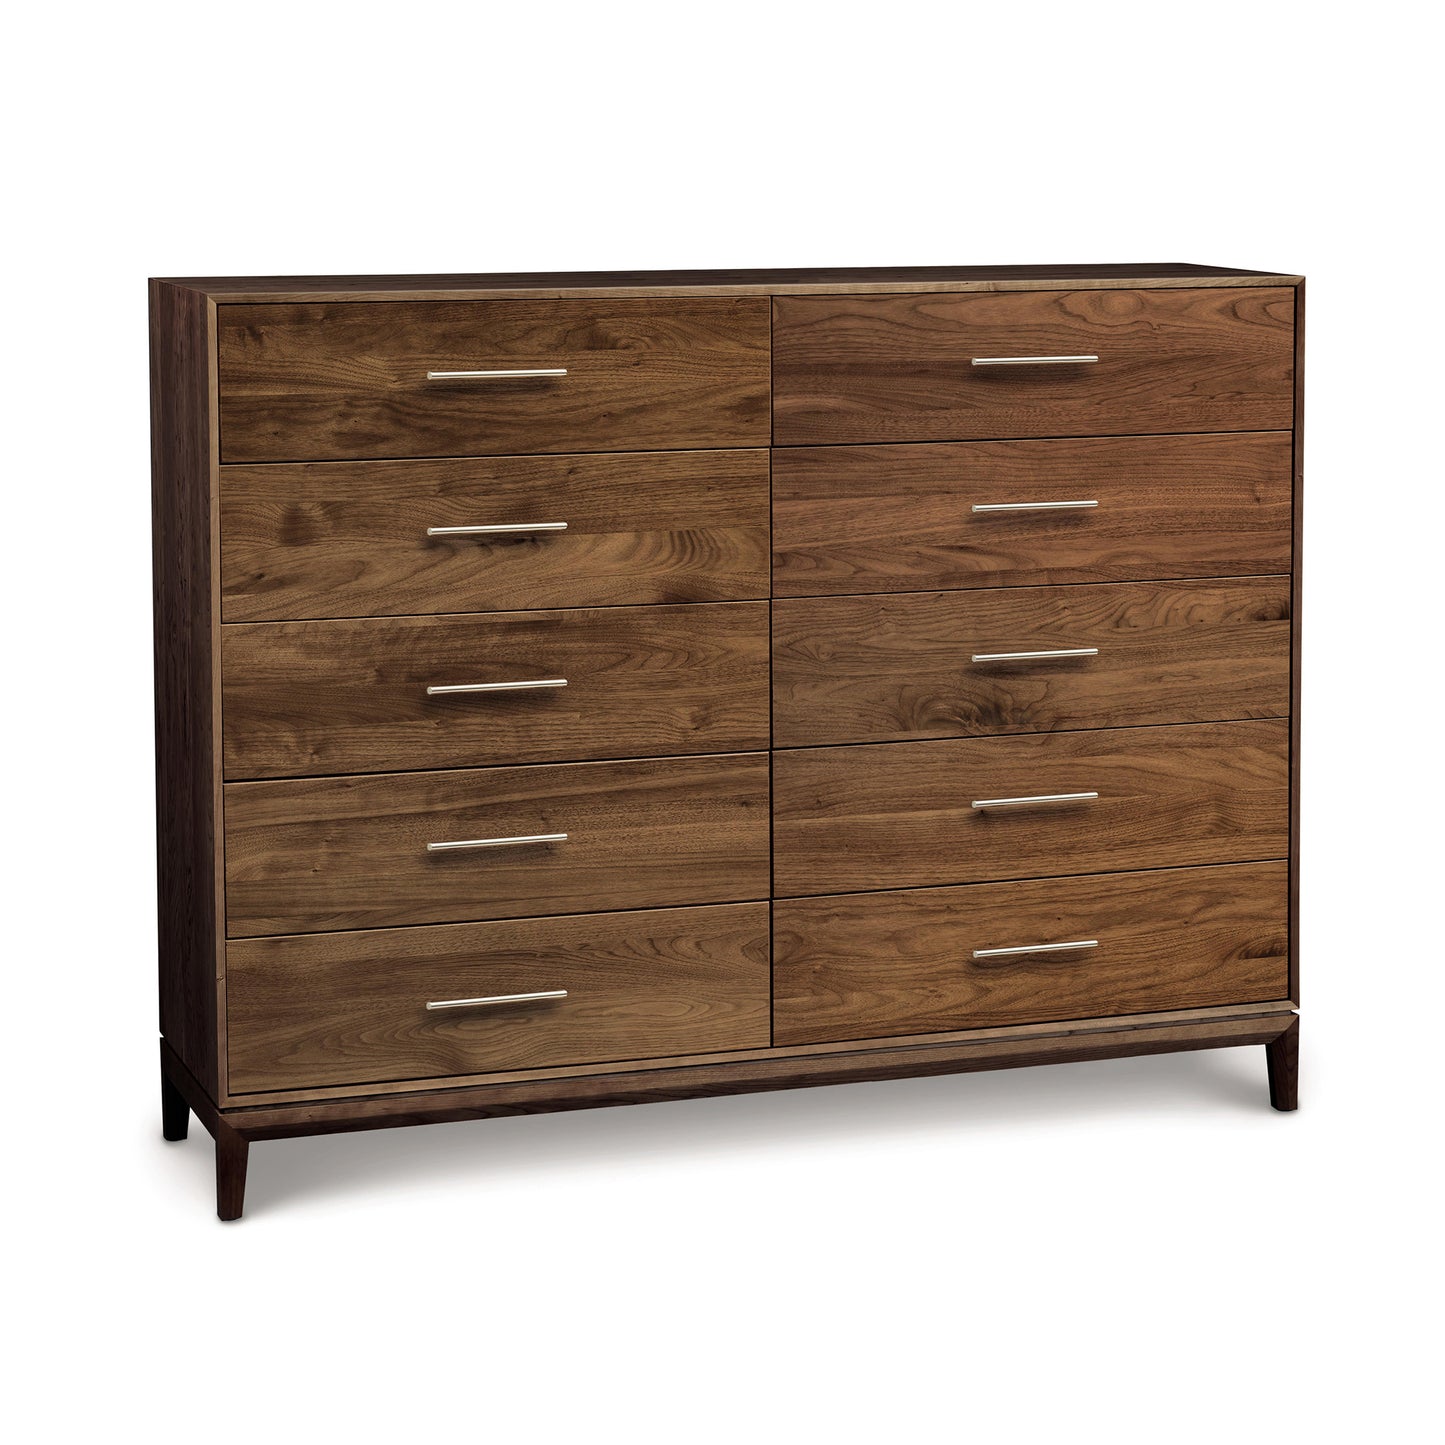 A Copeland Furniture Mansfield 10-Drawer Dresser crafted from sustainably harvested North American hardwood, featuring metal handles against a white background.